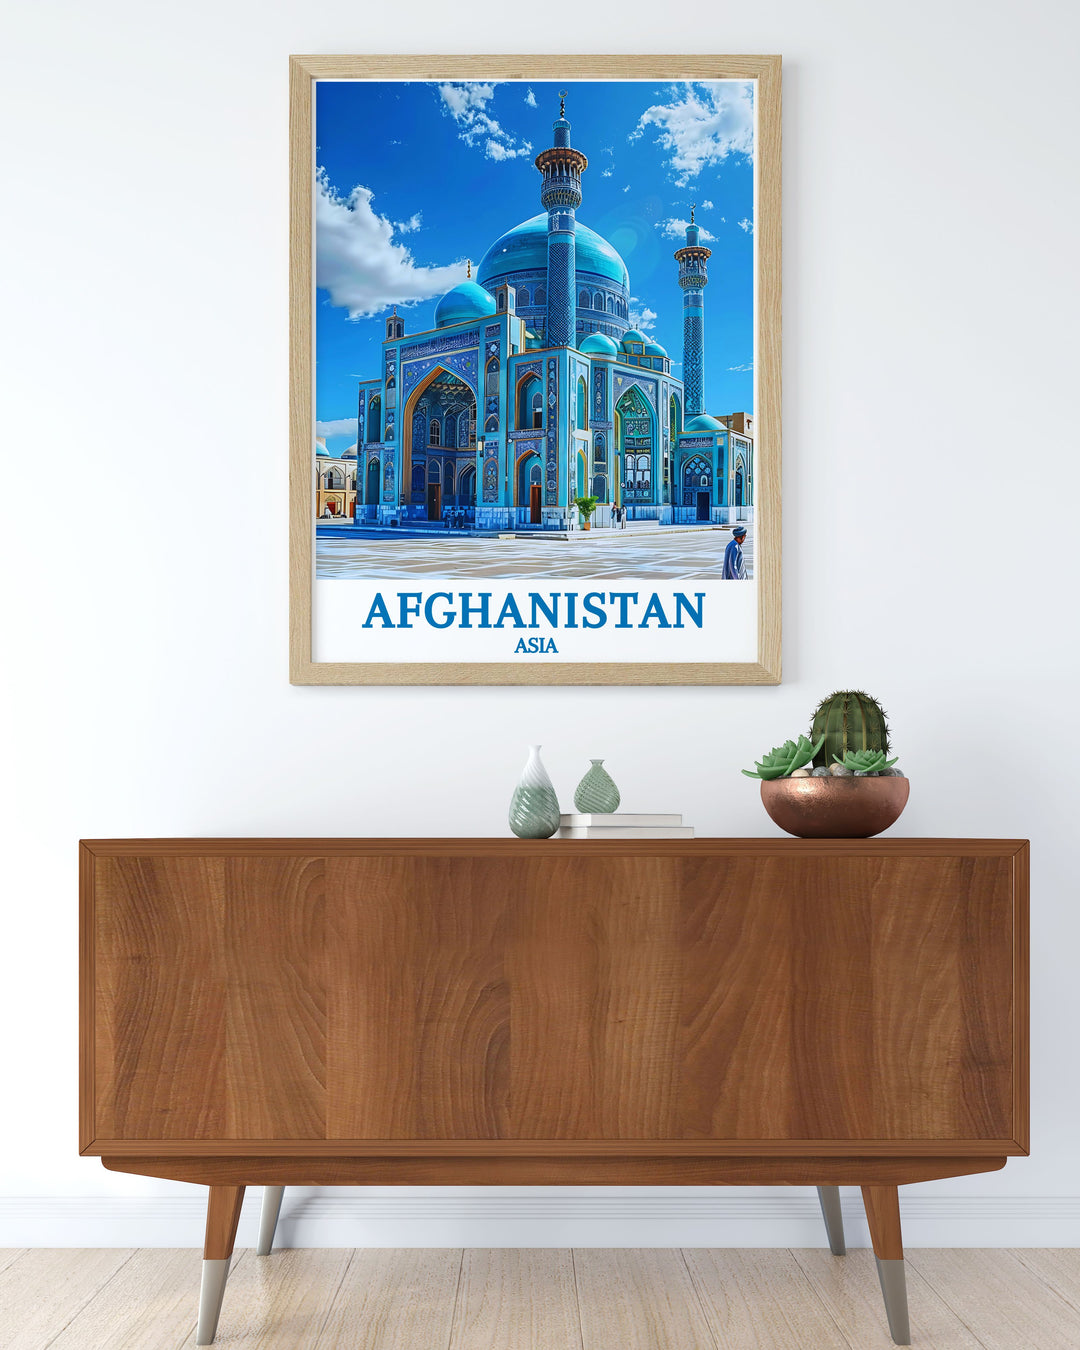 Discover the vibrant colors and fine details of The Blue Mosque Mazar e Sharif in this Afghanistan Colorful Art piece a captivating print that brings a piece of cultural heritage into your home